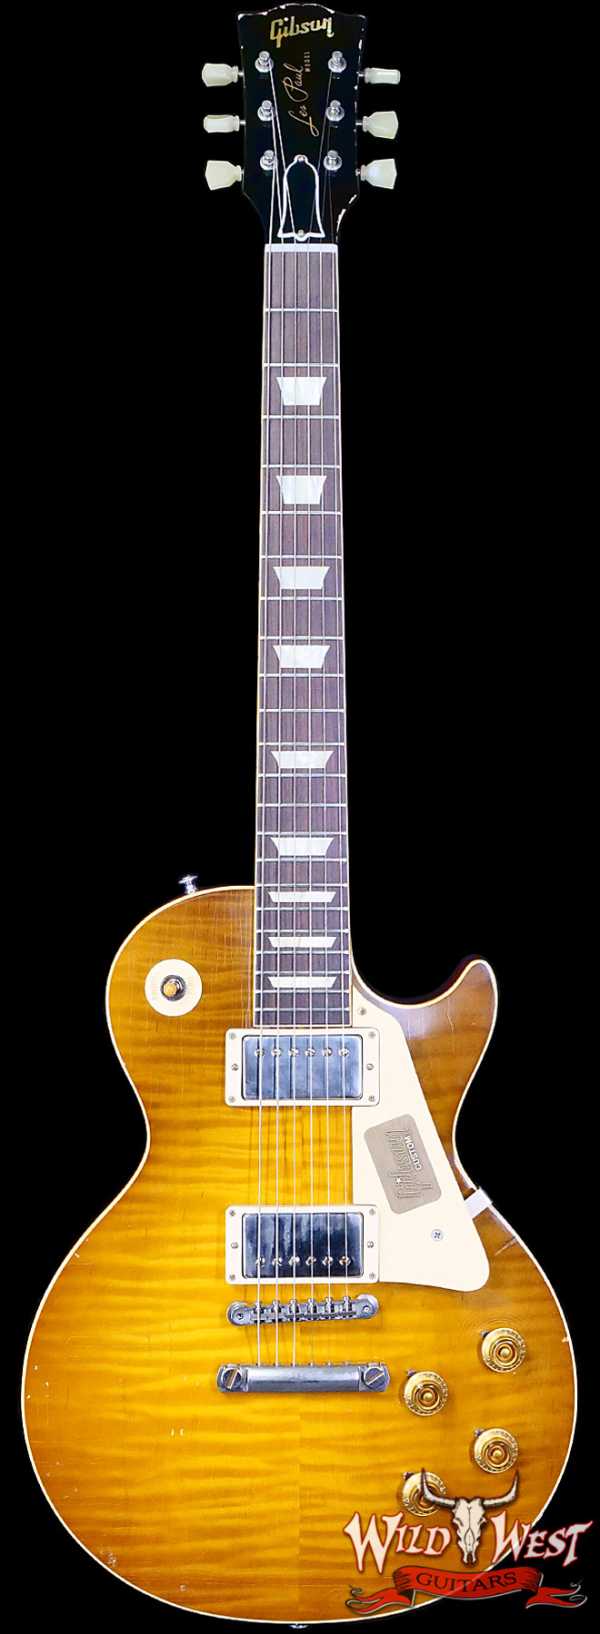 2016 Gibson Custom Shop Collectors Choice CC #24 “Nicky” Charles Daughtry 1959 Les Paul Replica 8.35 LBS